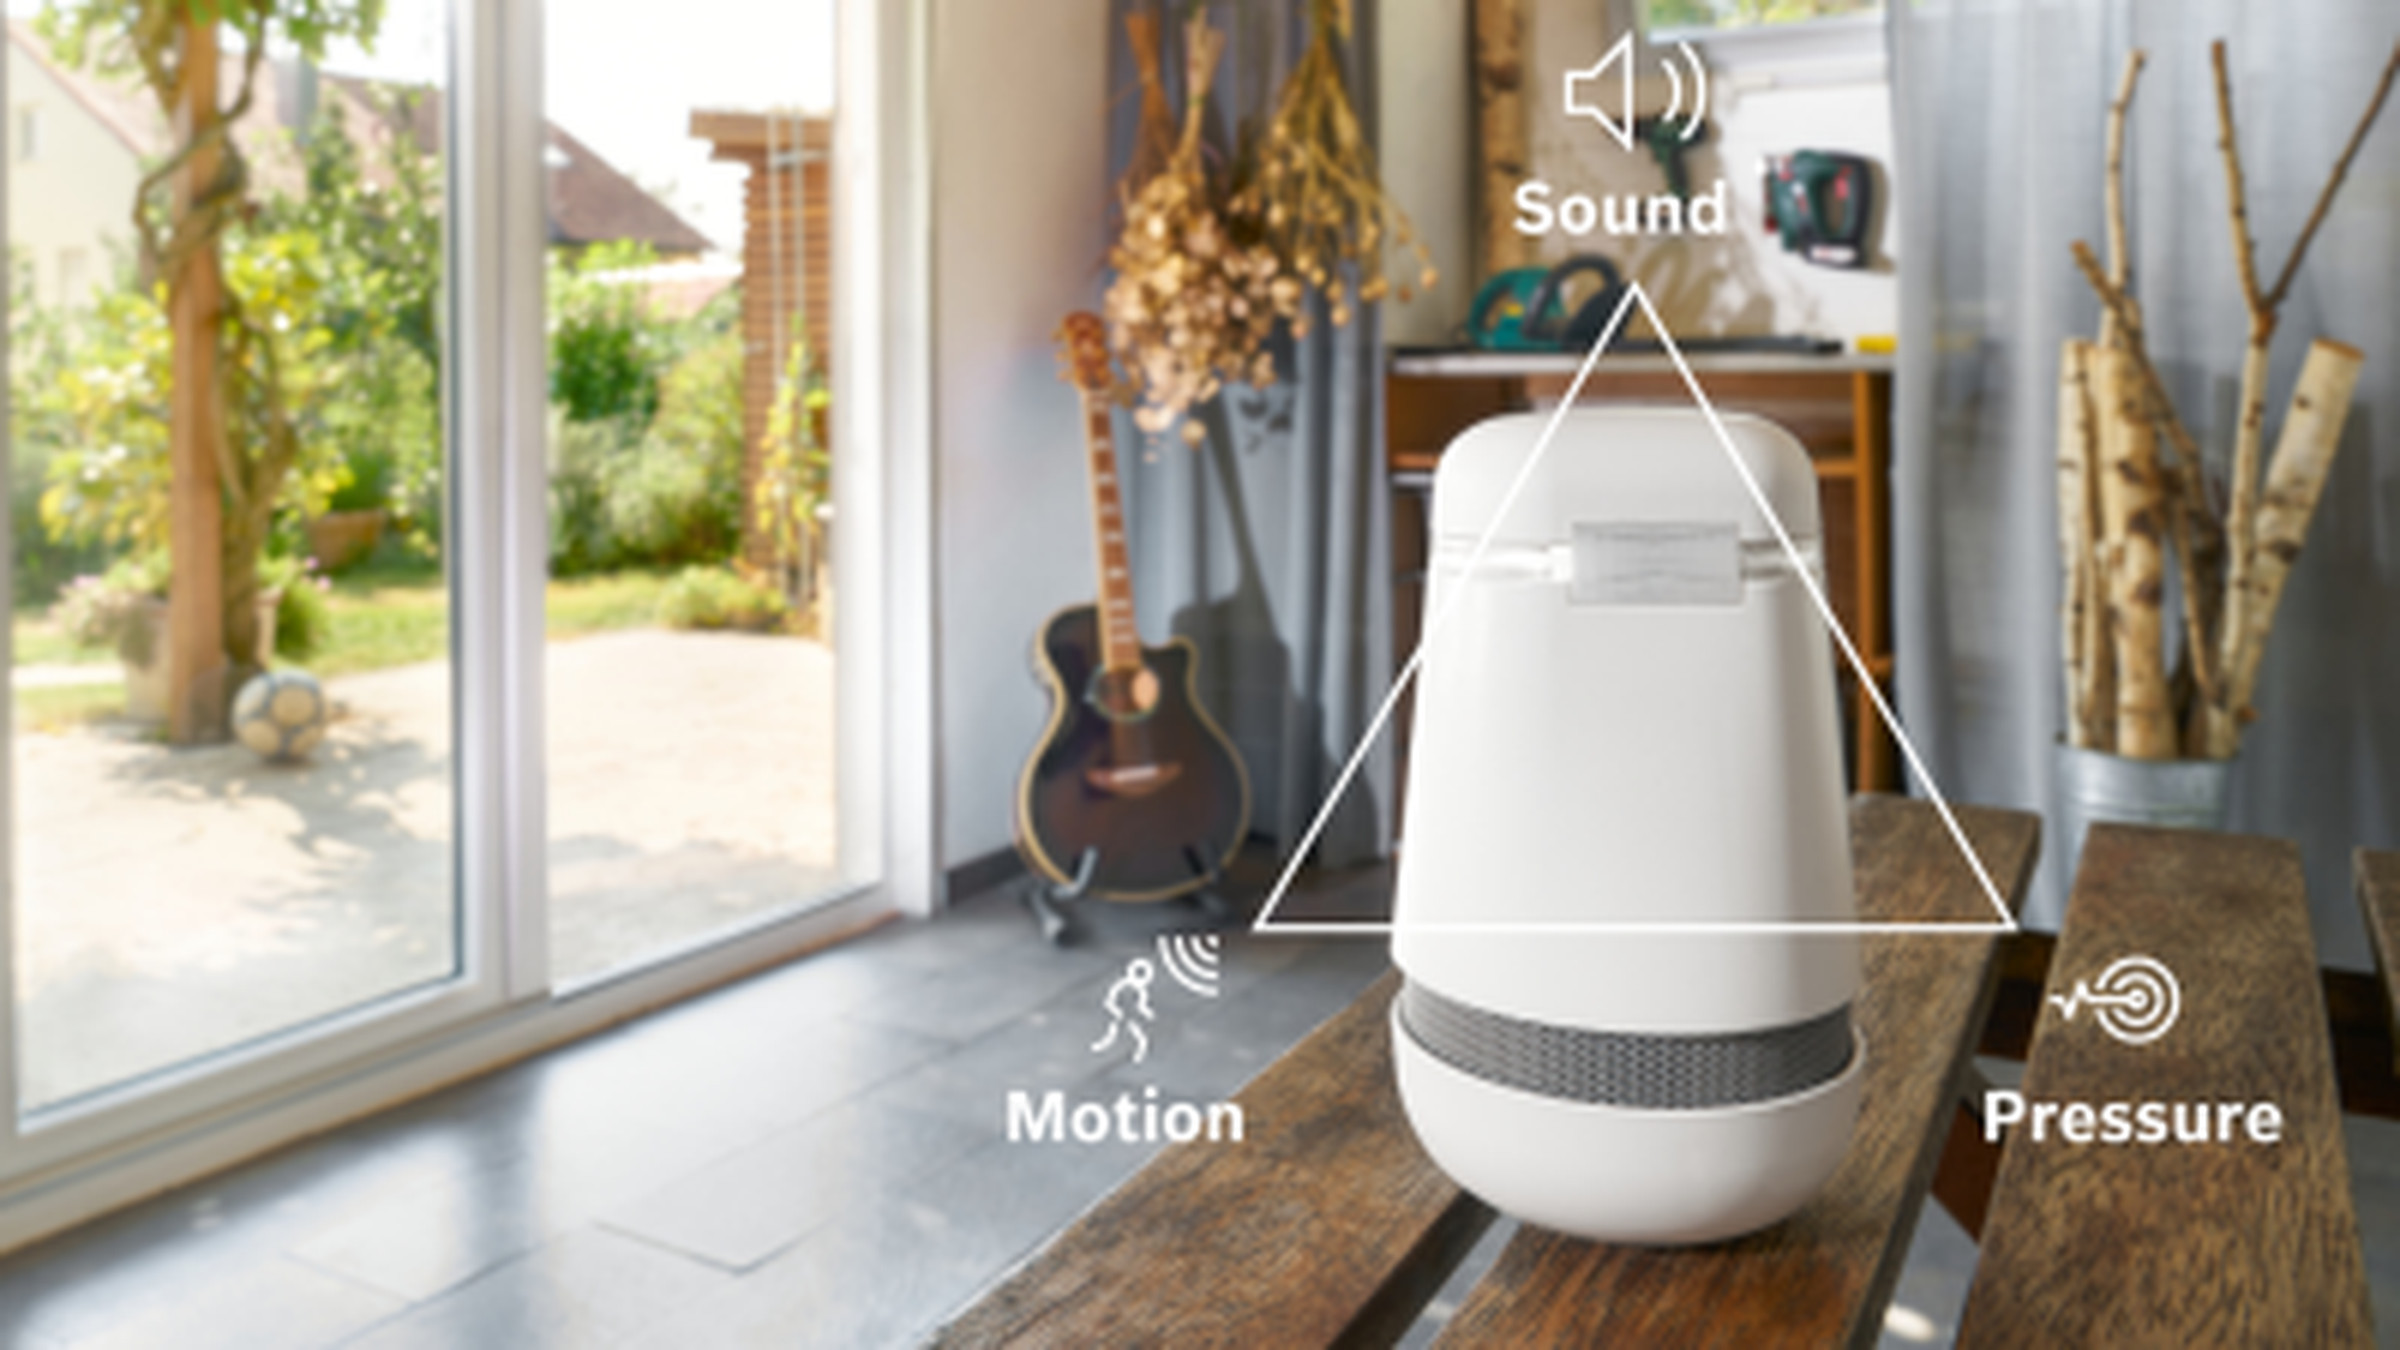 Smart security gets cute with this teeny, portable solution from Bosch.